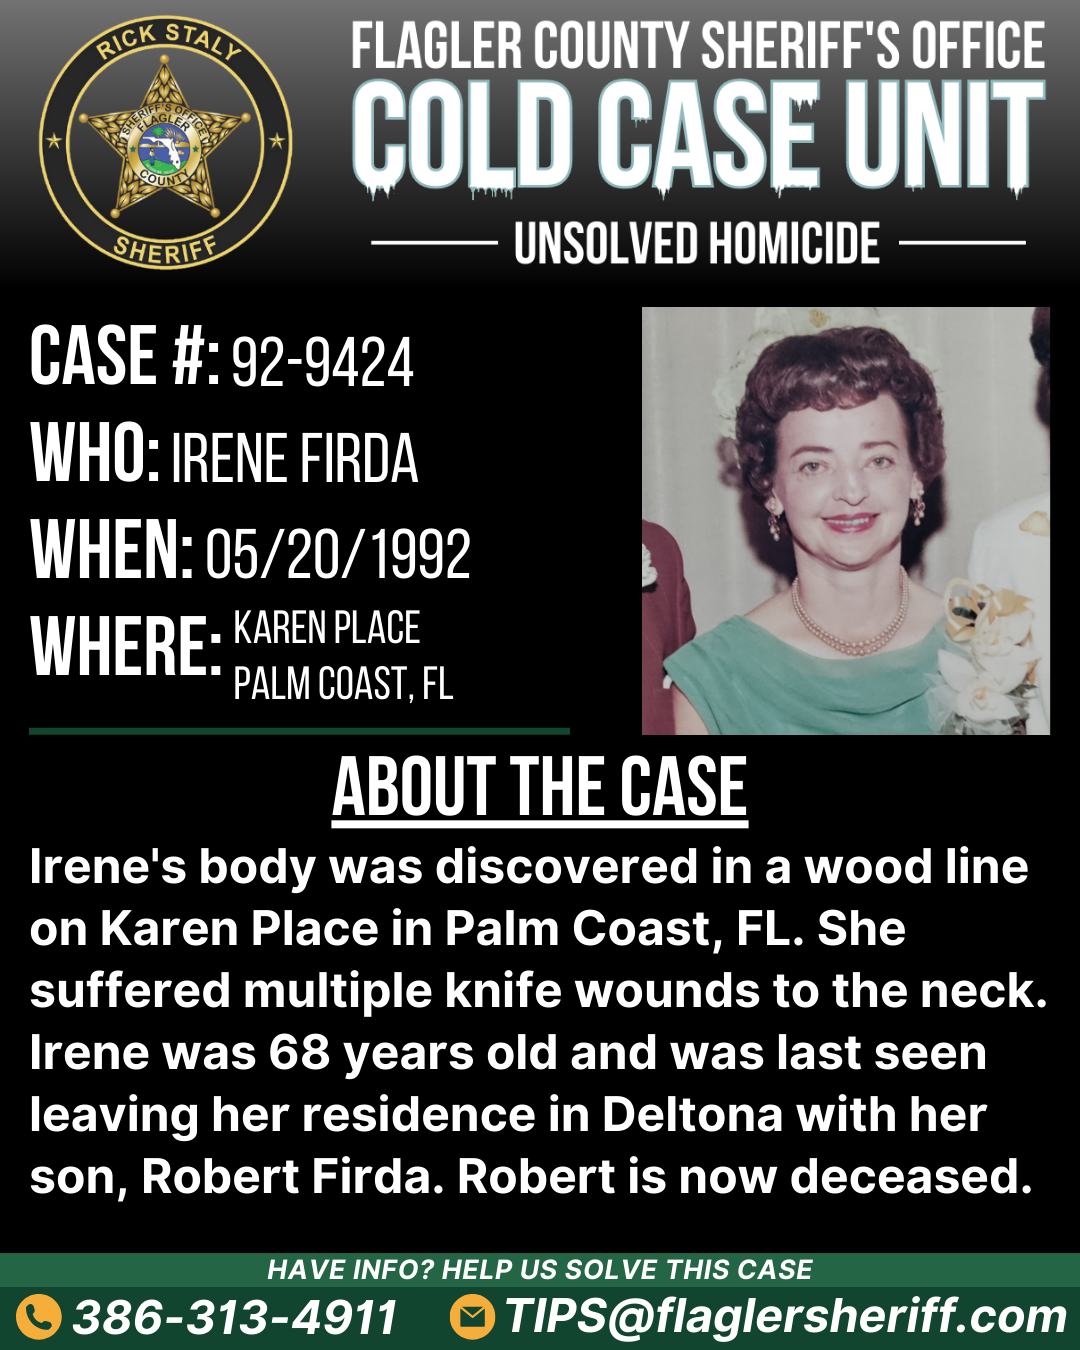 Unsolved homicide. Case #92-9424. Who: Irene Firda. When: 05/20/1992. Where: Karen Place (Palm Coast, FL). About the case: Irene's body was discovered in a wood line on Karen Place in Palm Coast, FL. She suffered multiple knife wounds to the neck. Irene was 68 years old and was last seen leaving her residence in Deltona with her son, Robert Firda. Robert is now deceased.